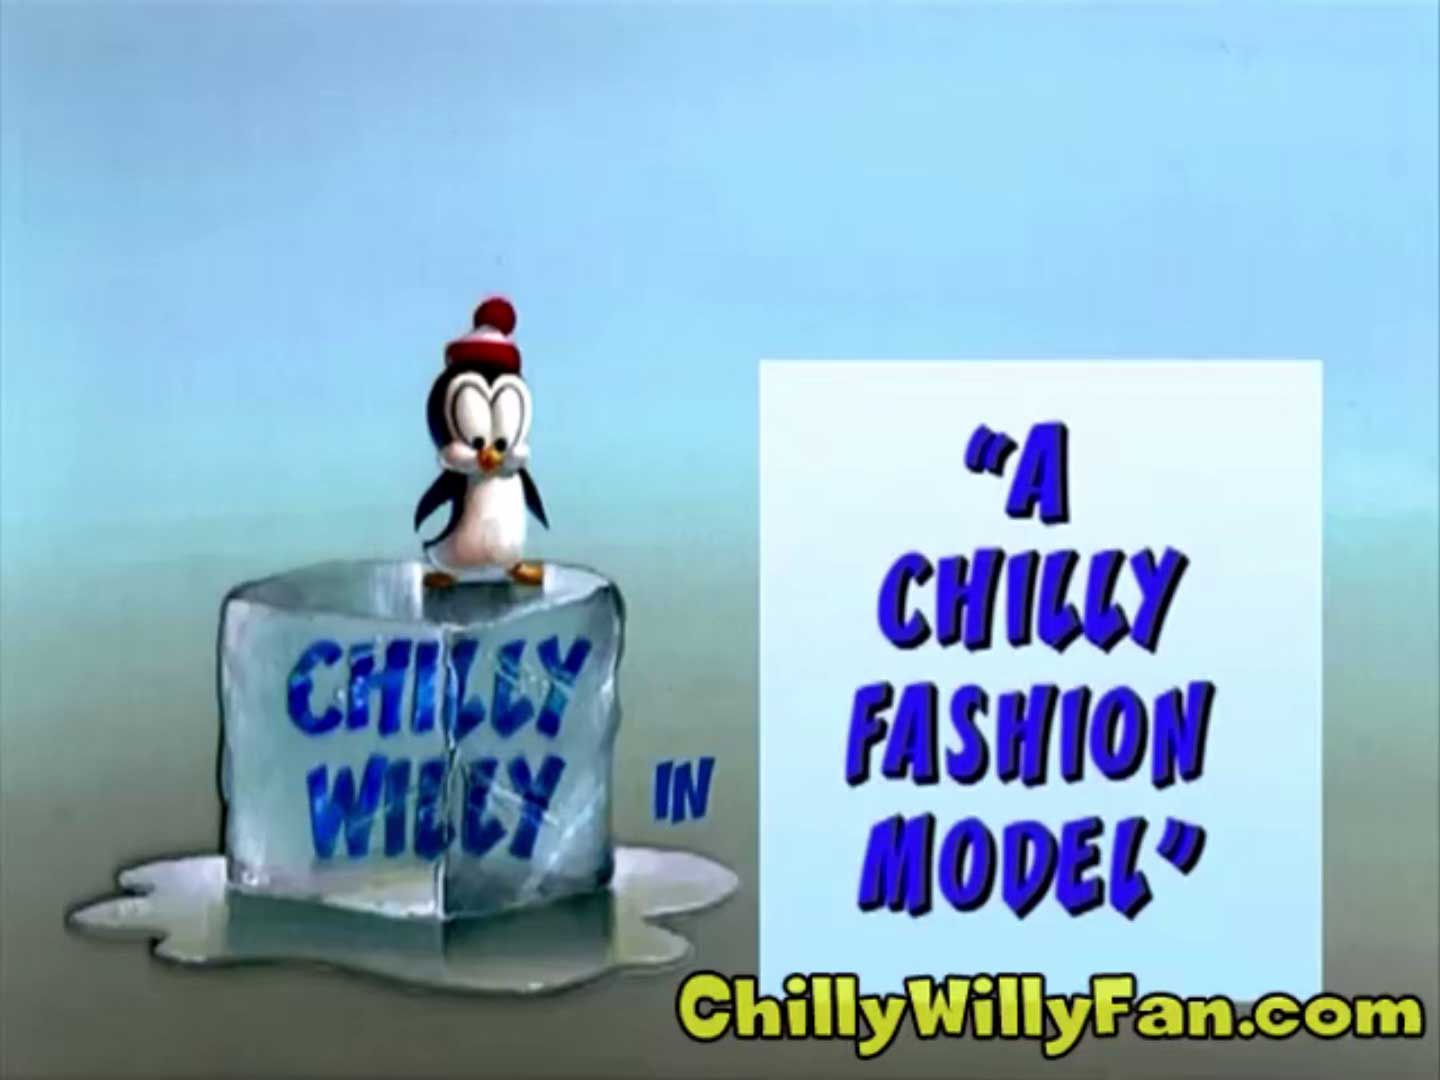 Chilly Willy - A Chilly Fashion Model